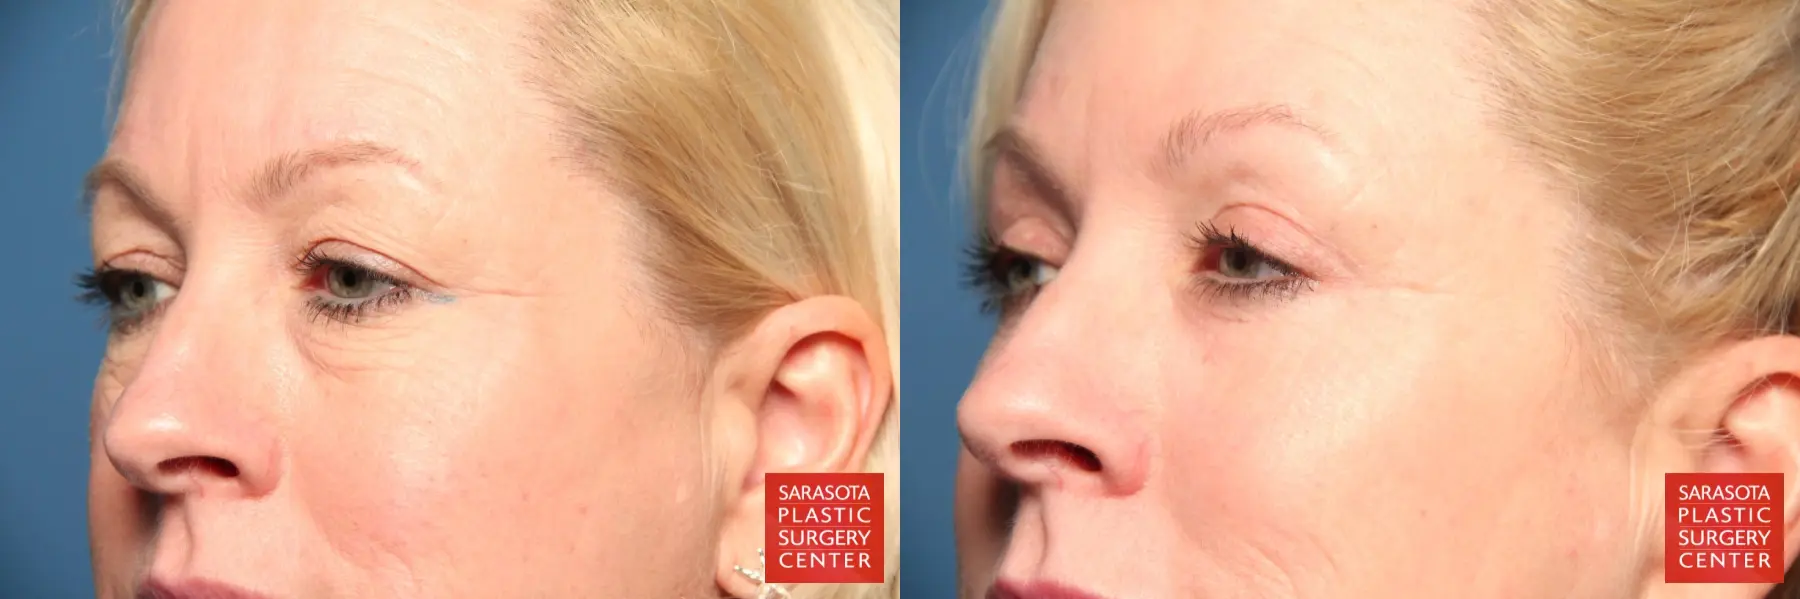 Eyelid Lift: Patient 4 - Before and After 2